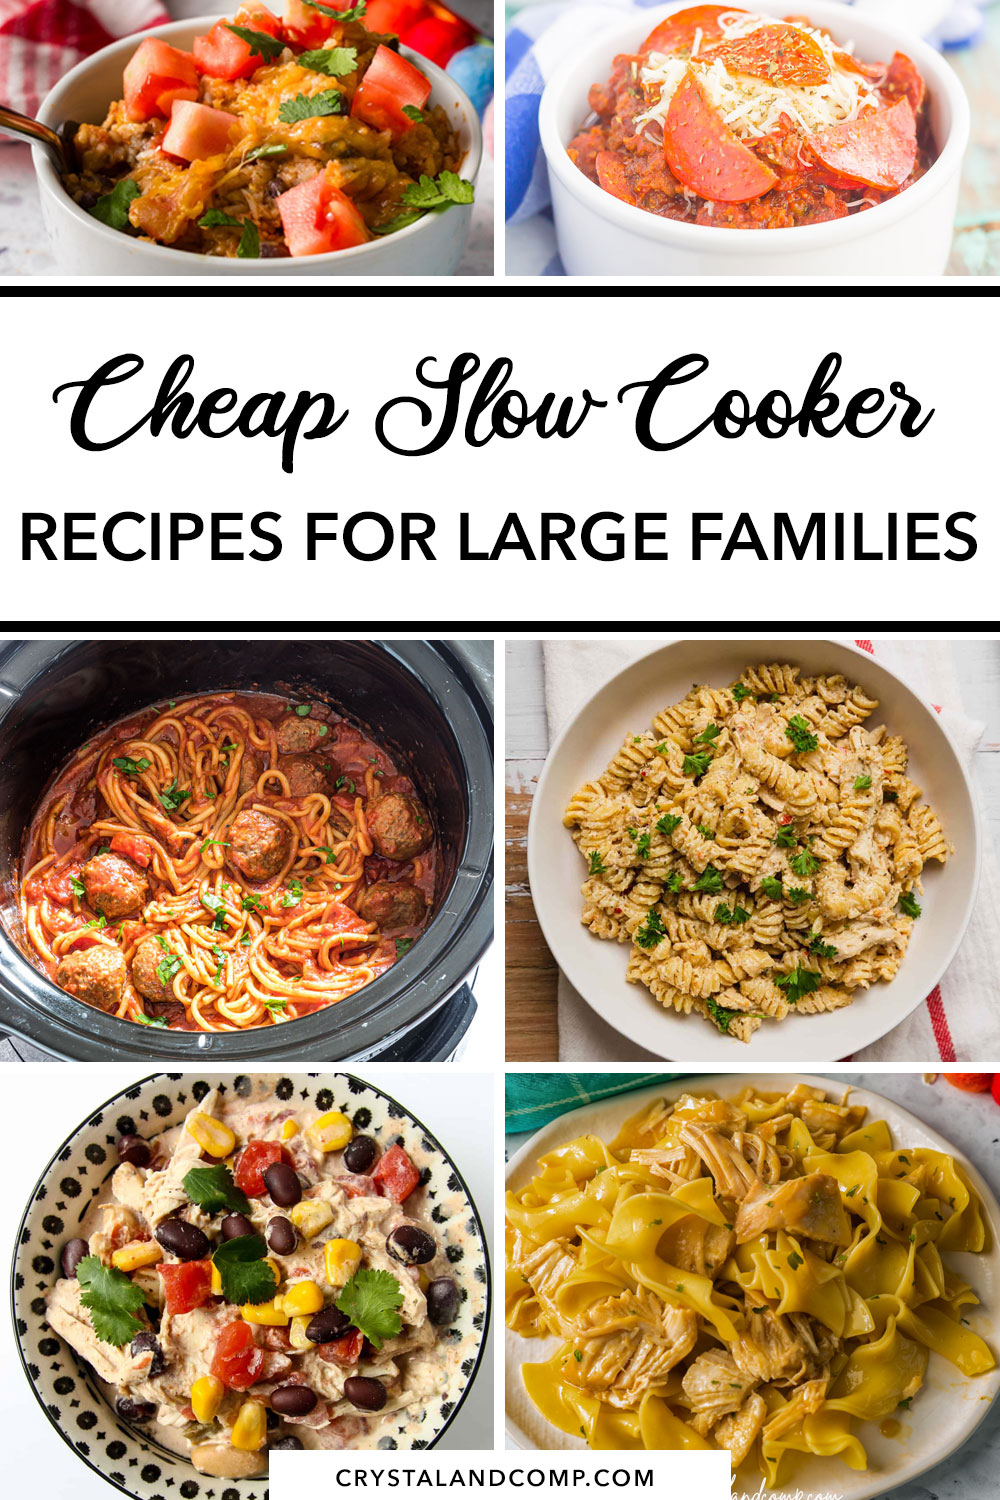 Cheap Slow Cooker Recipes for Large Families - CrystalandComp.com